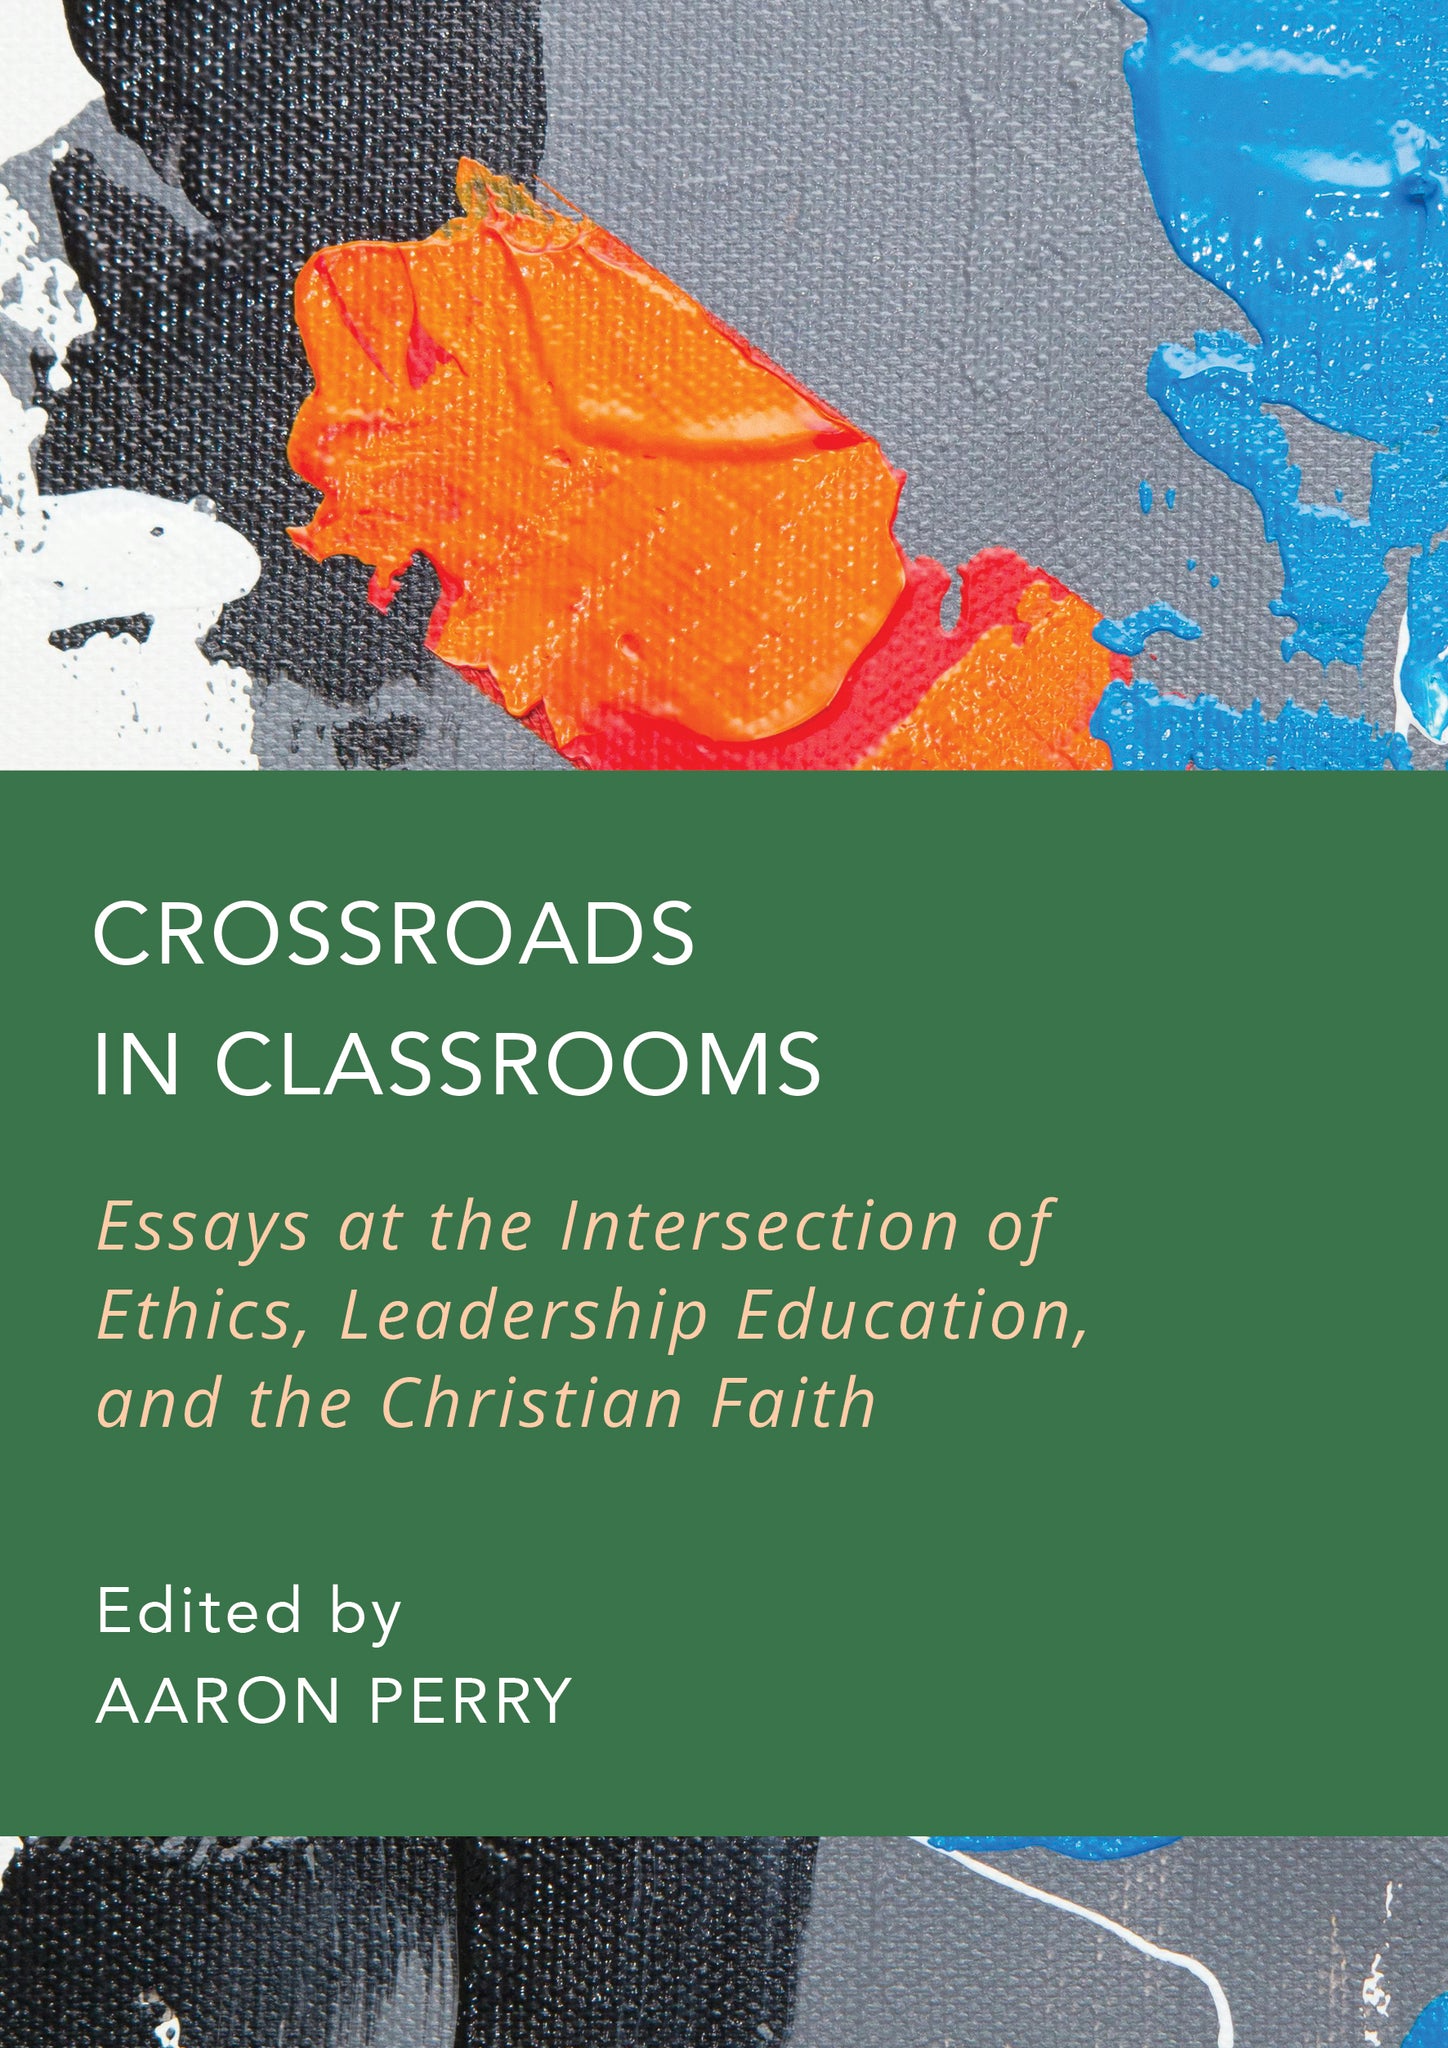 Crossroads in Classrooms: Essays at the Intersection of Ethics, Leadership Education, and the Christian Faith